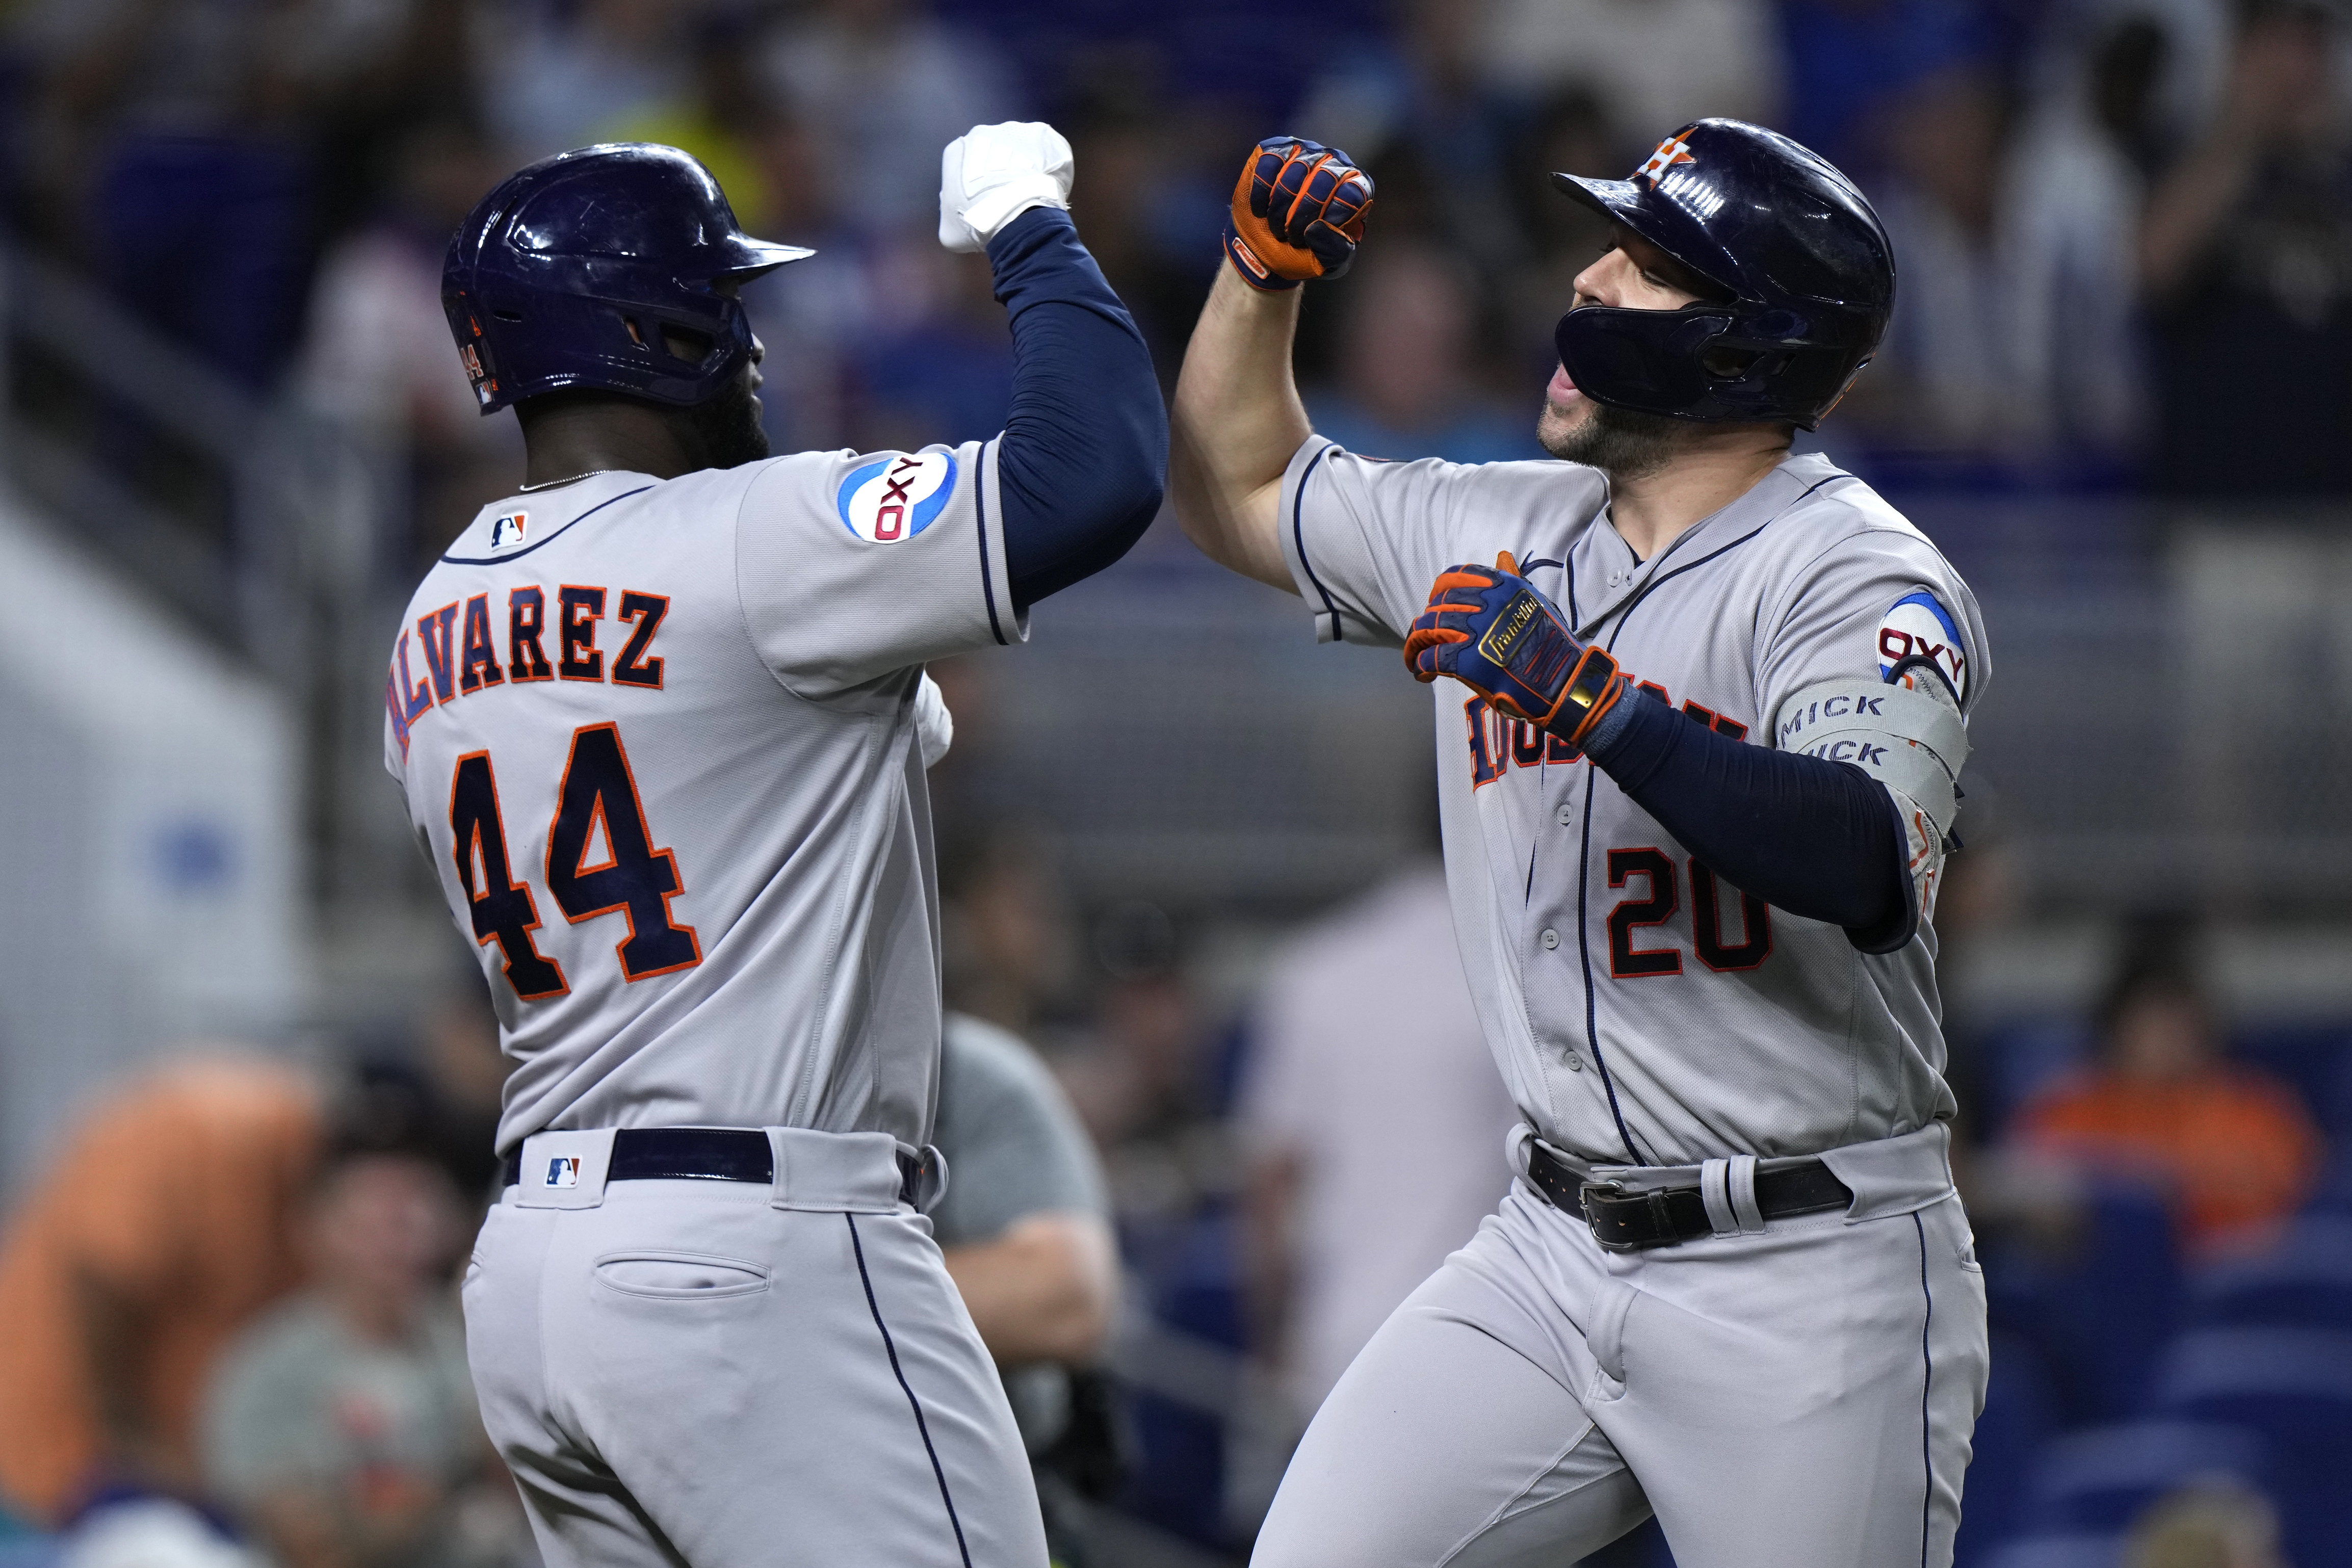 Early trio of homers leads Astros to rout of Marlins